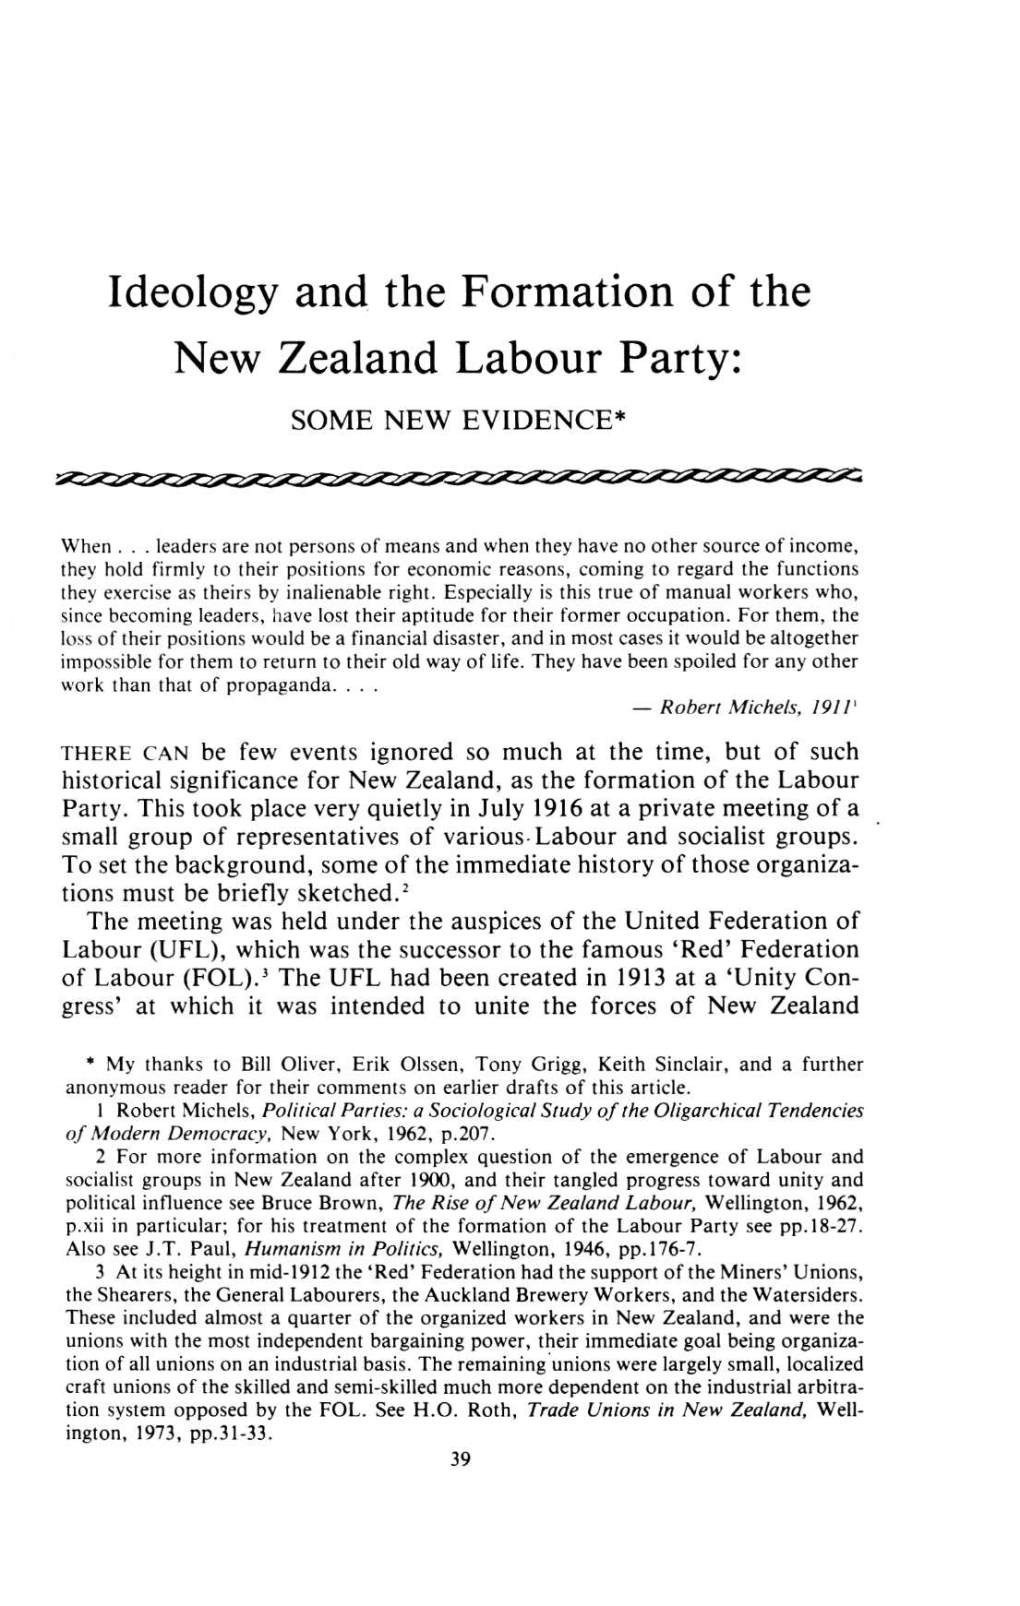 Ideology and the Formation of the New Zealand Labour Party: SOME NEW EVIDENCE*